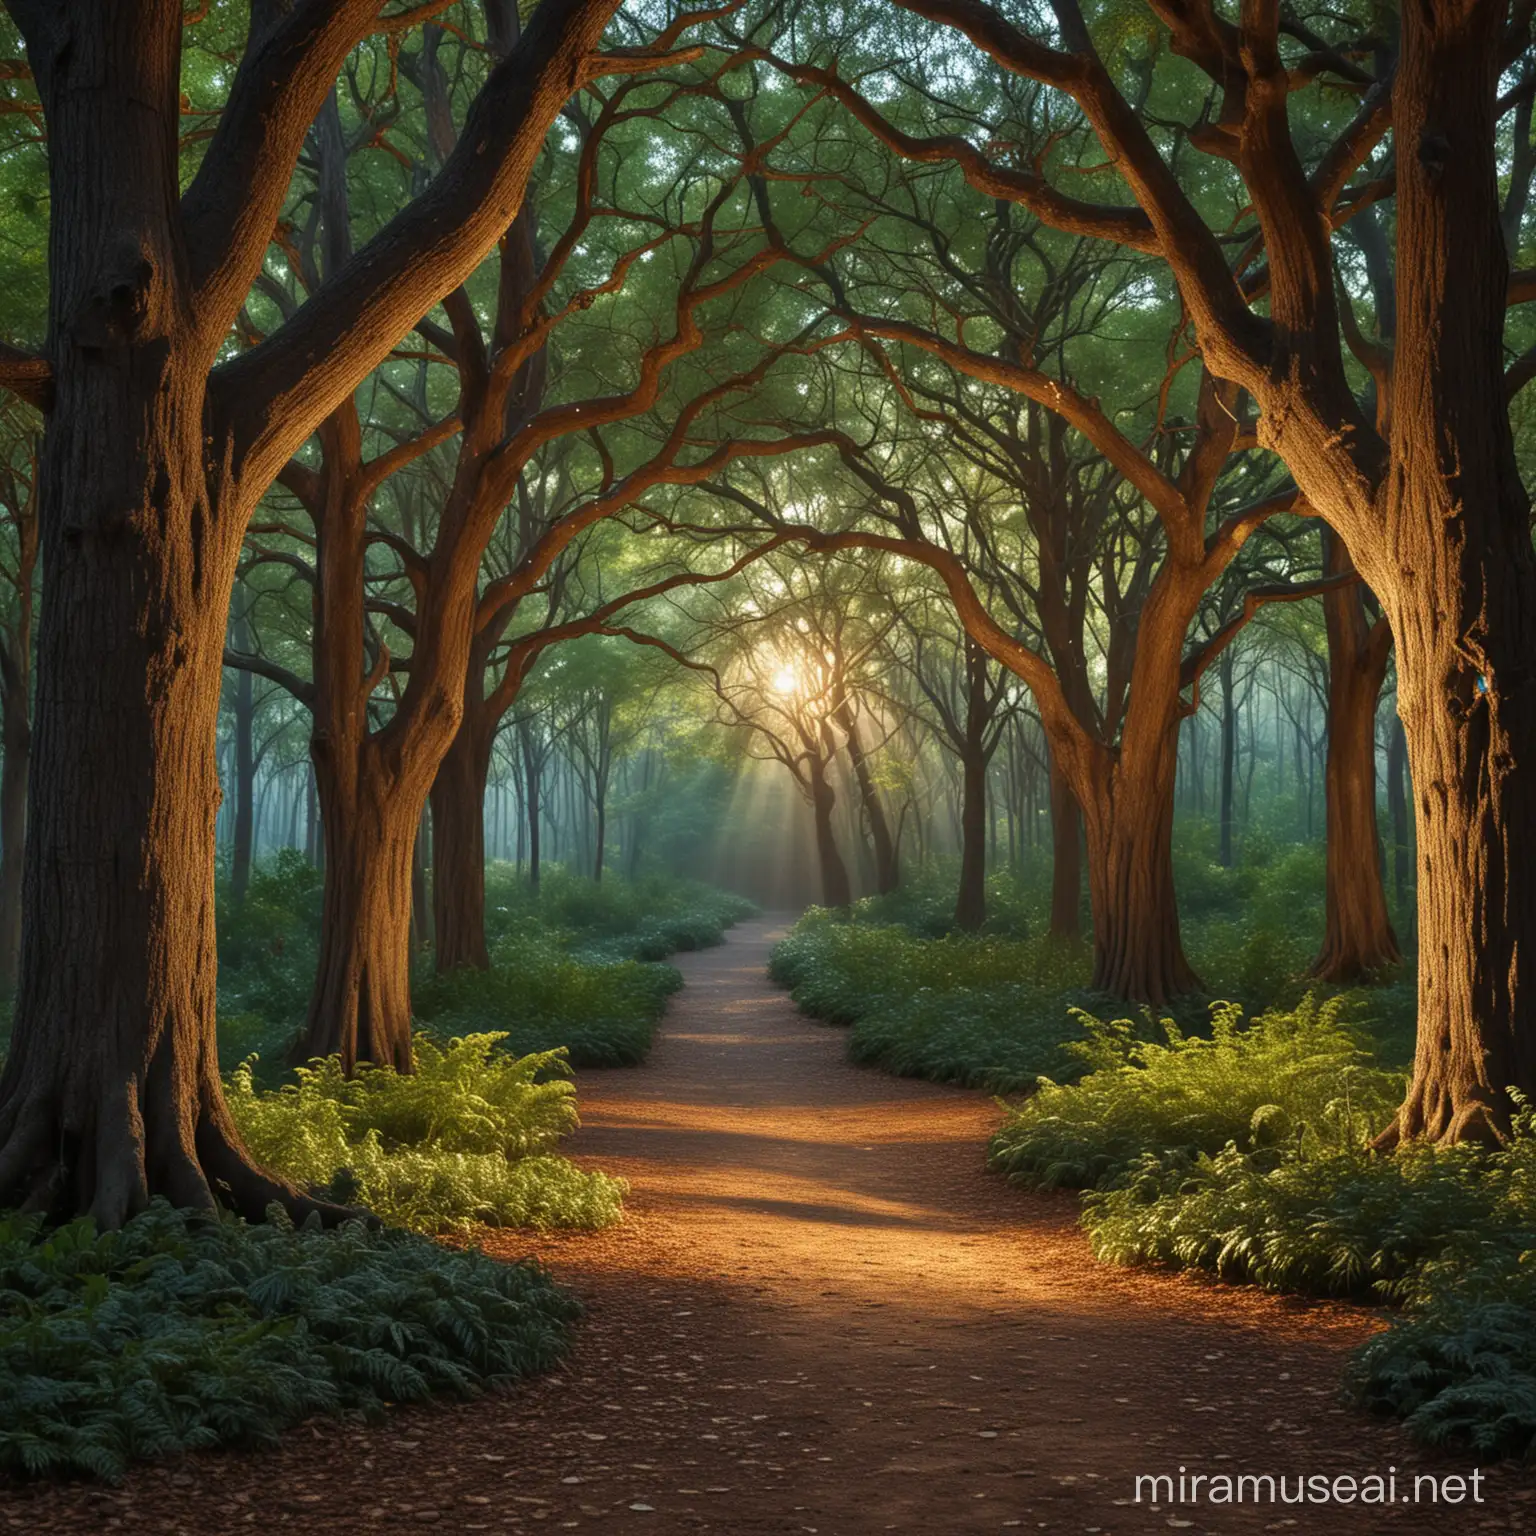 Mystical Mosaic Forest with Sunbeams Through Giant Oaks